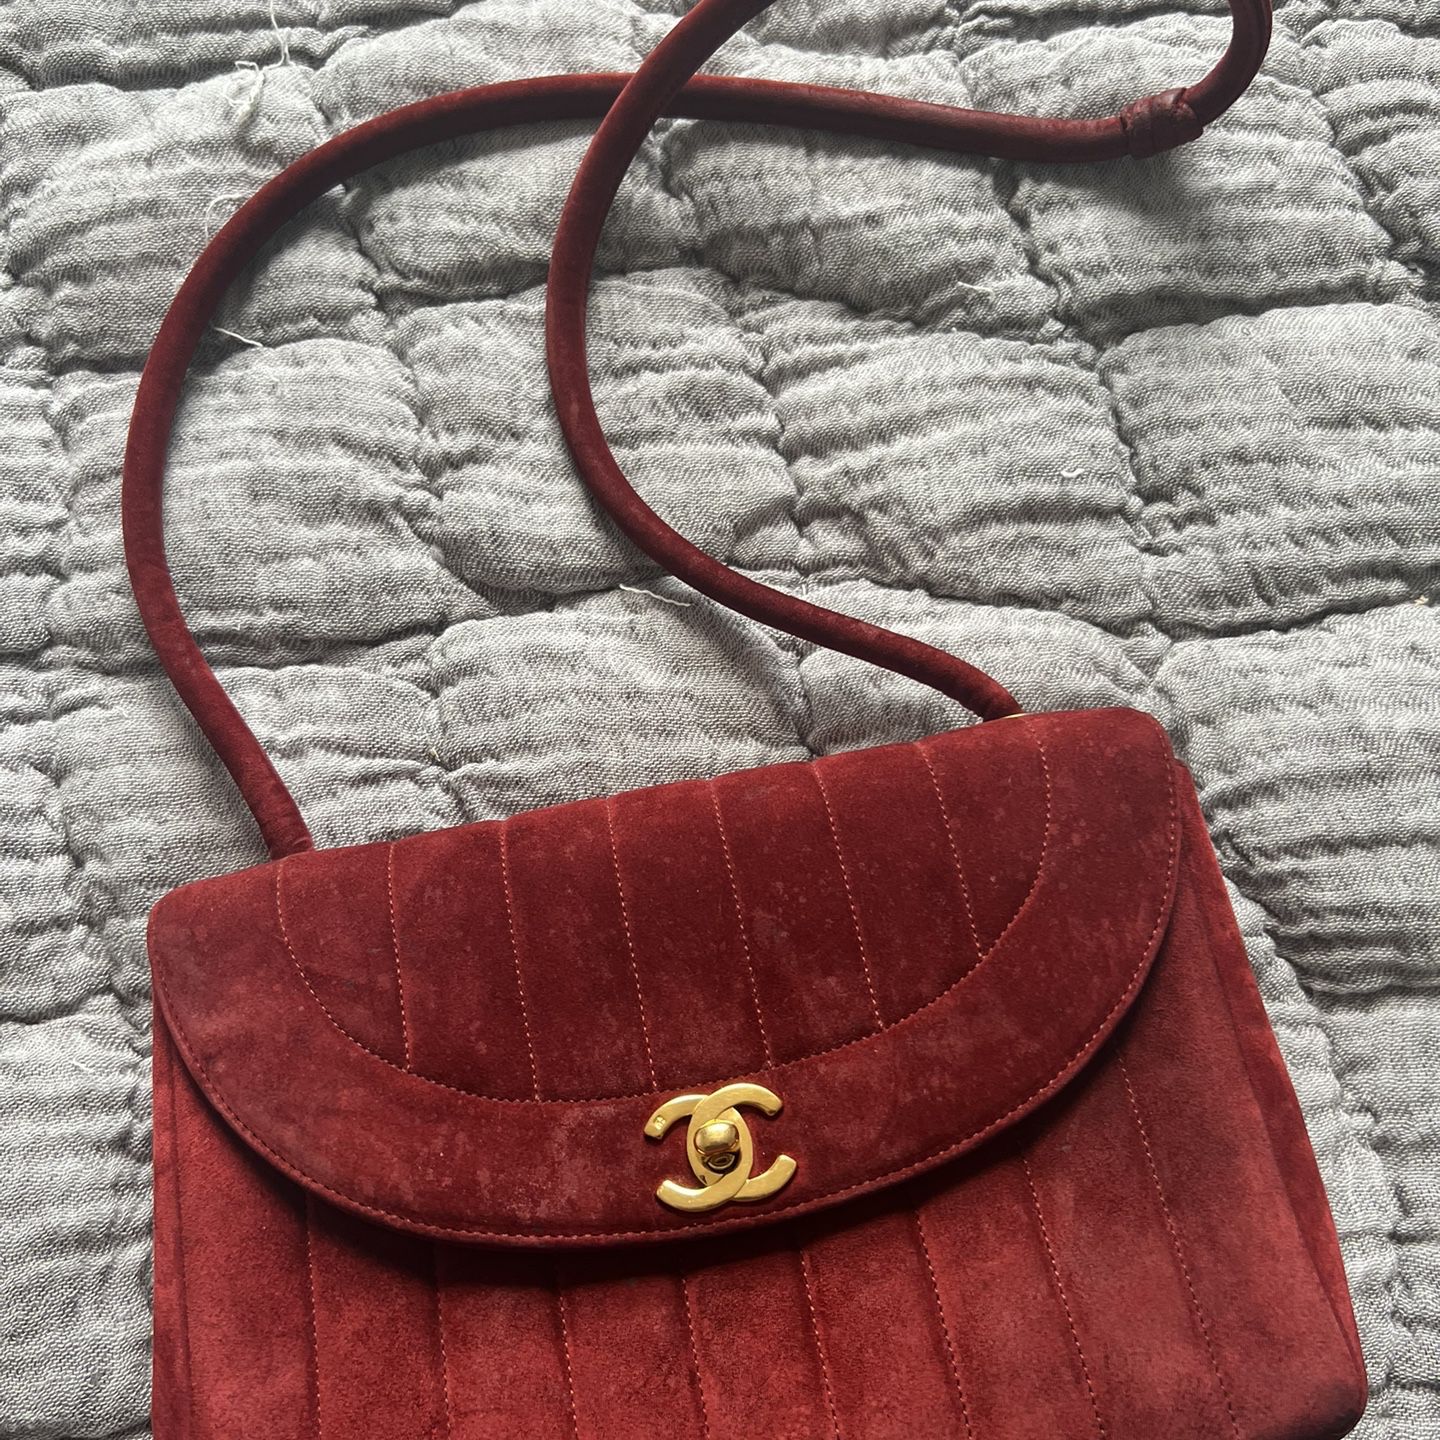 Vintage Chanel Diana Bag beige for Sale in Albany, CA - OfferUp